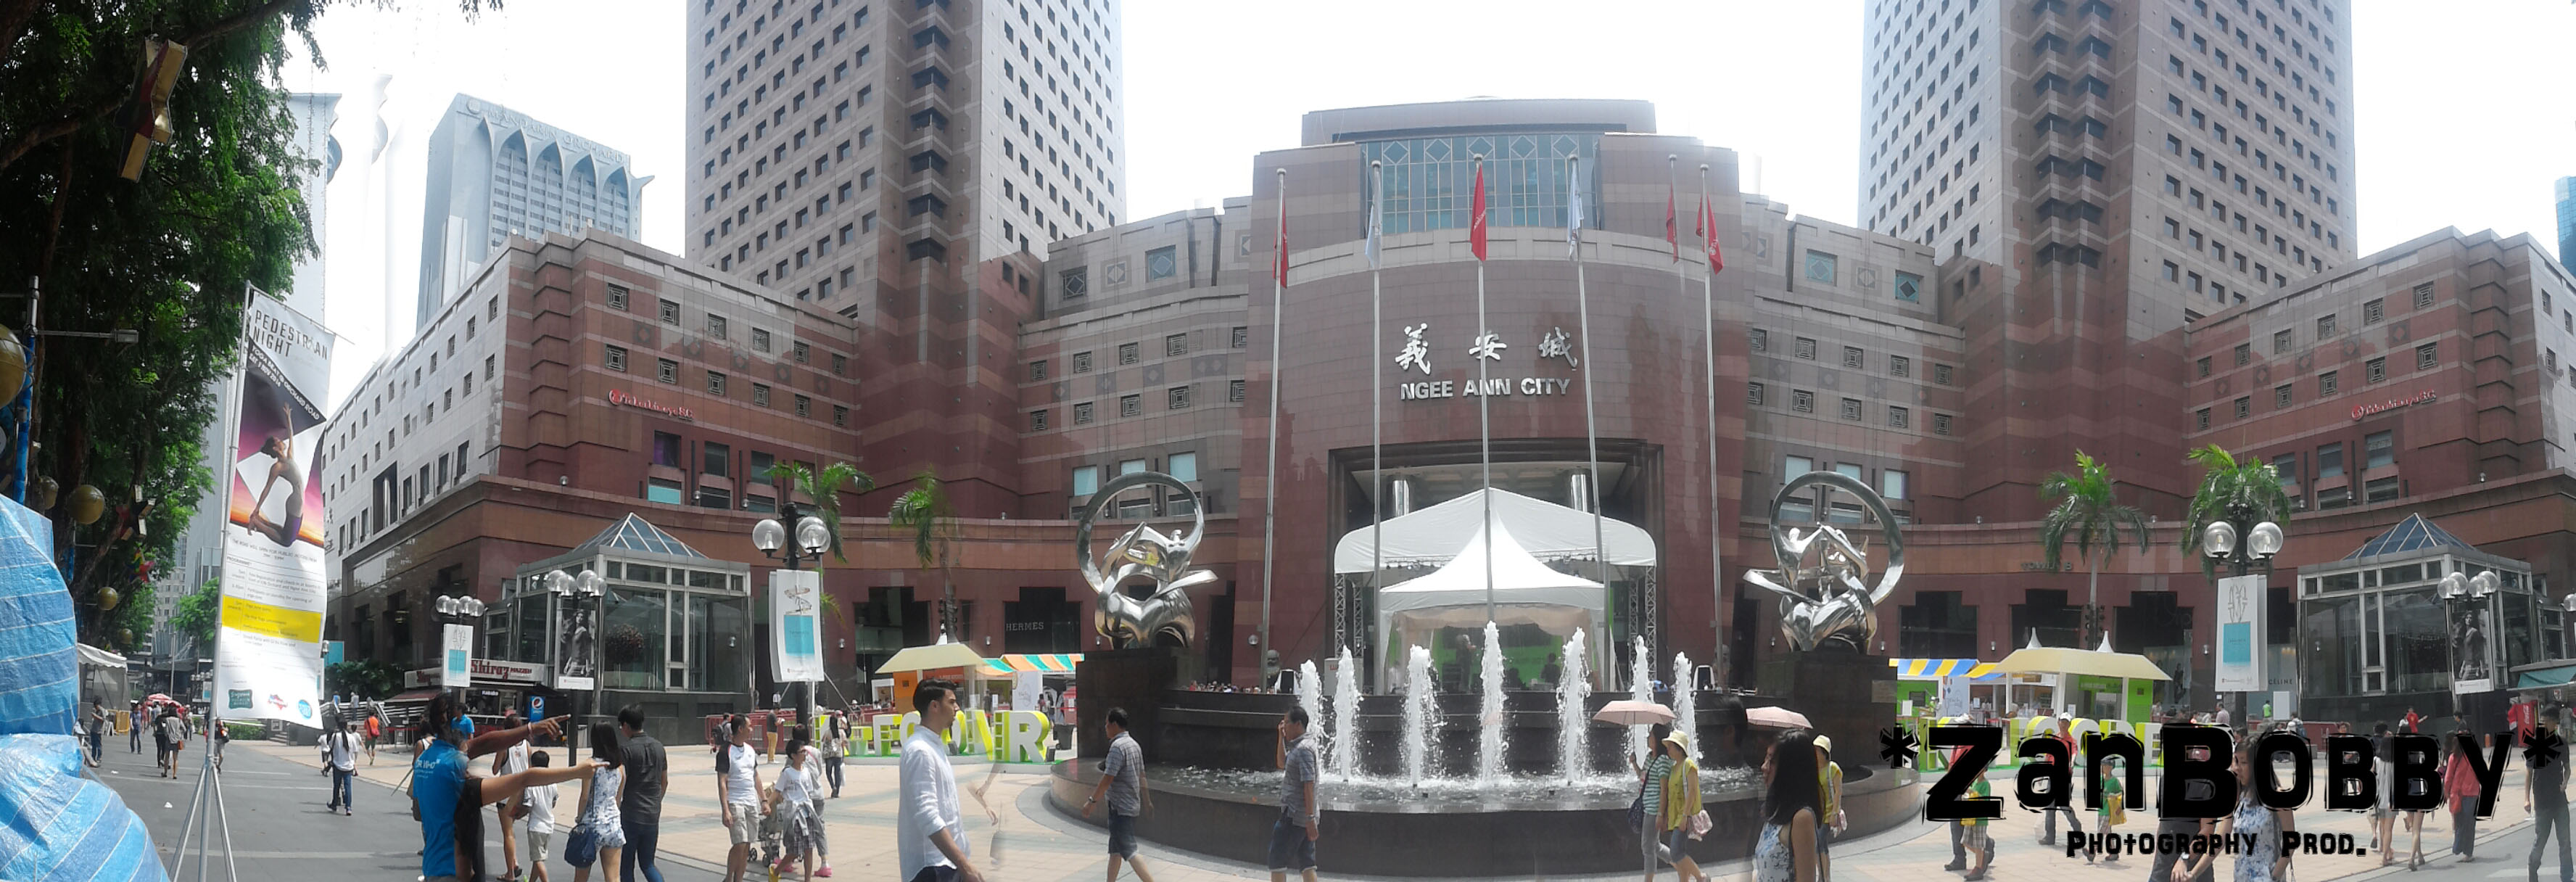 Ngee Ann City - Singapore: Get the Detail of Ngee Ann City on